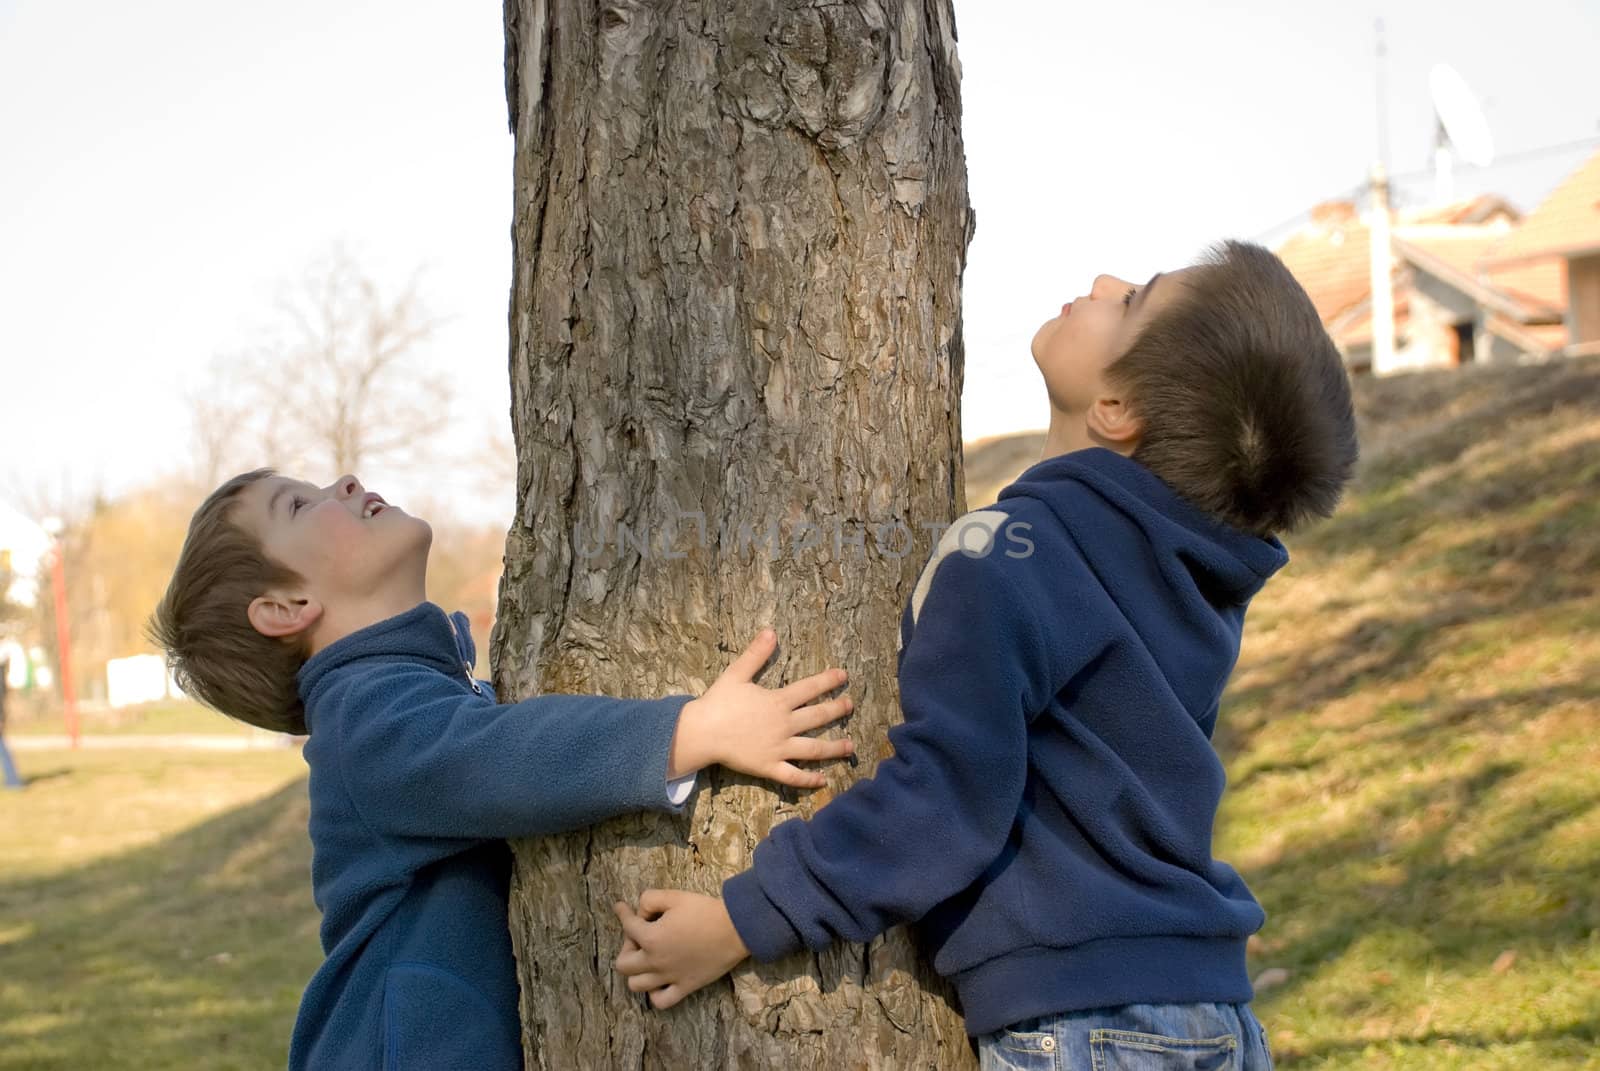 two boys hugging a tree and protecting it